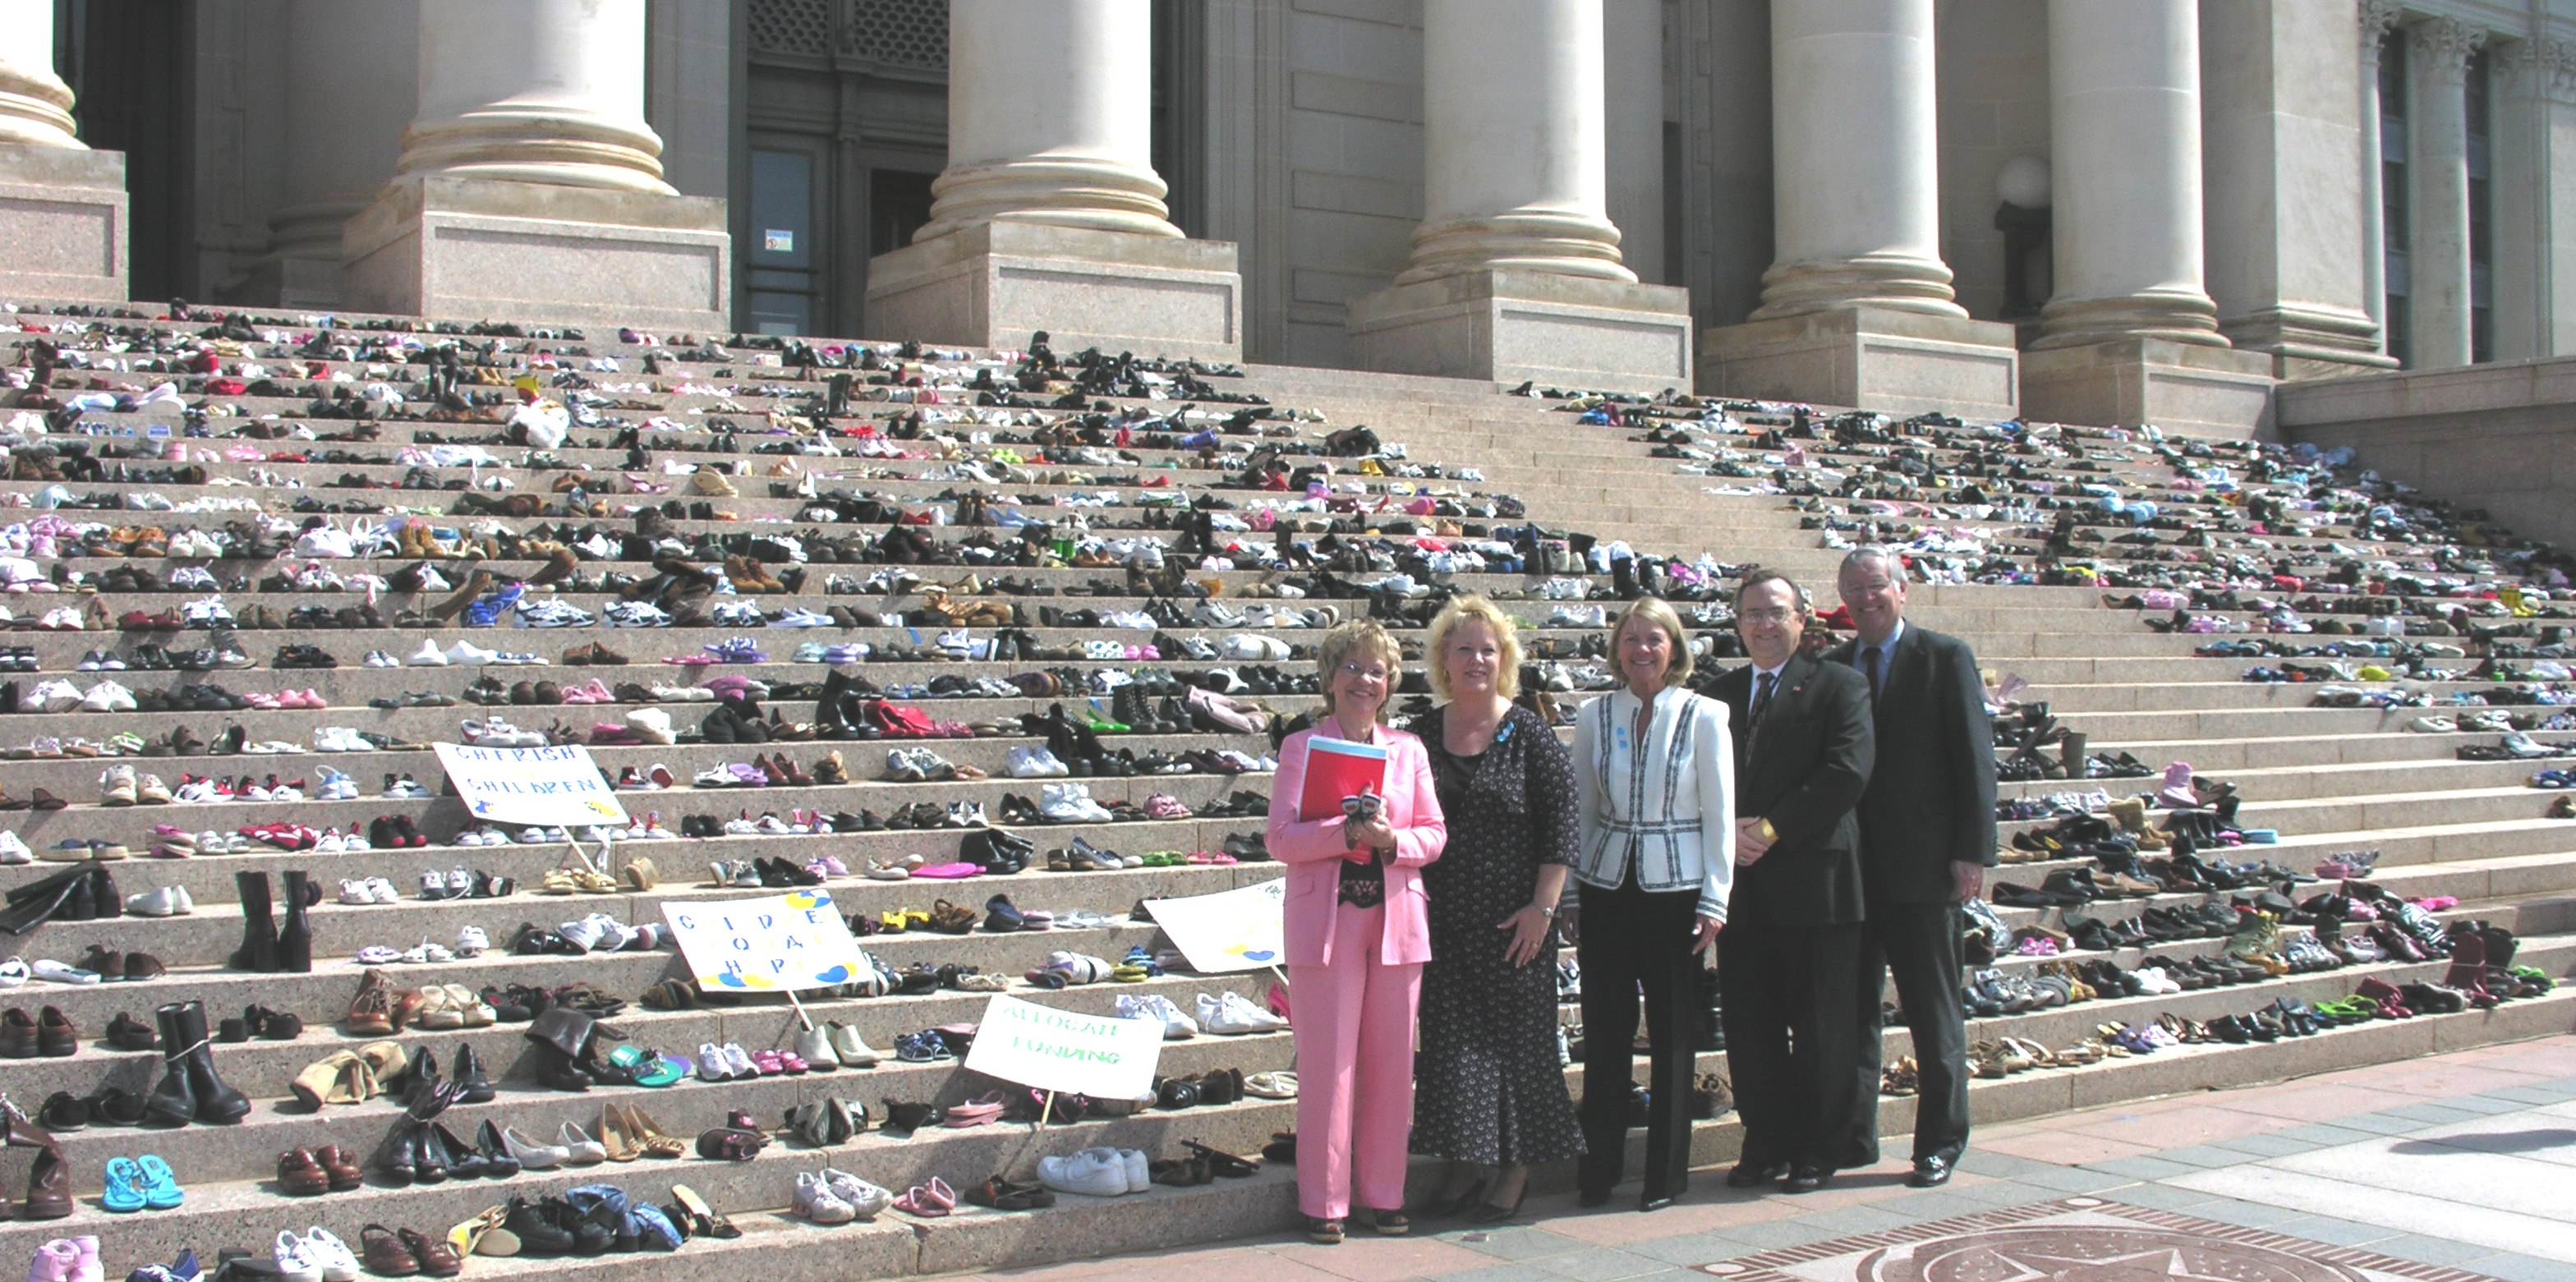 Legislators and officials pose with shoes on Capitol steps.